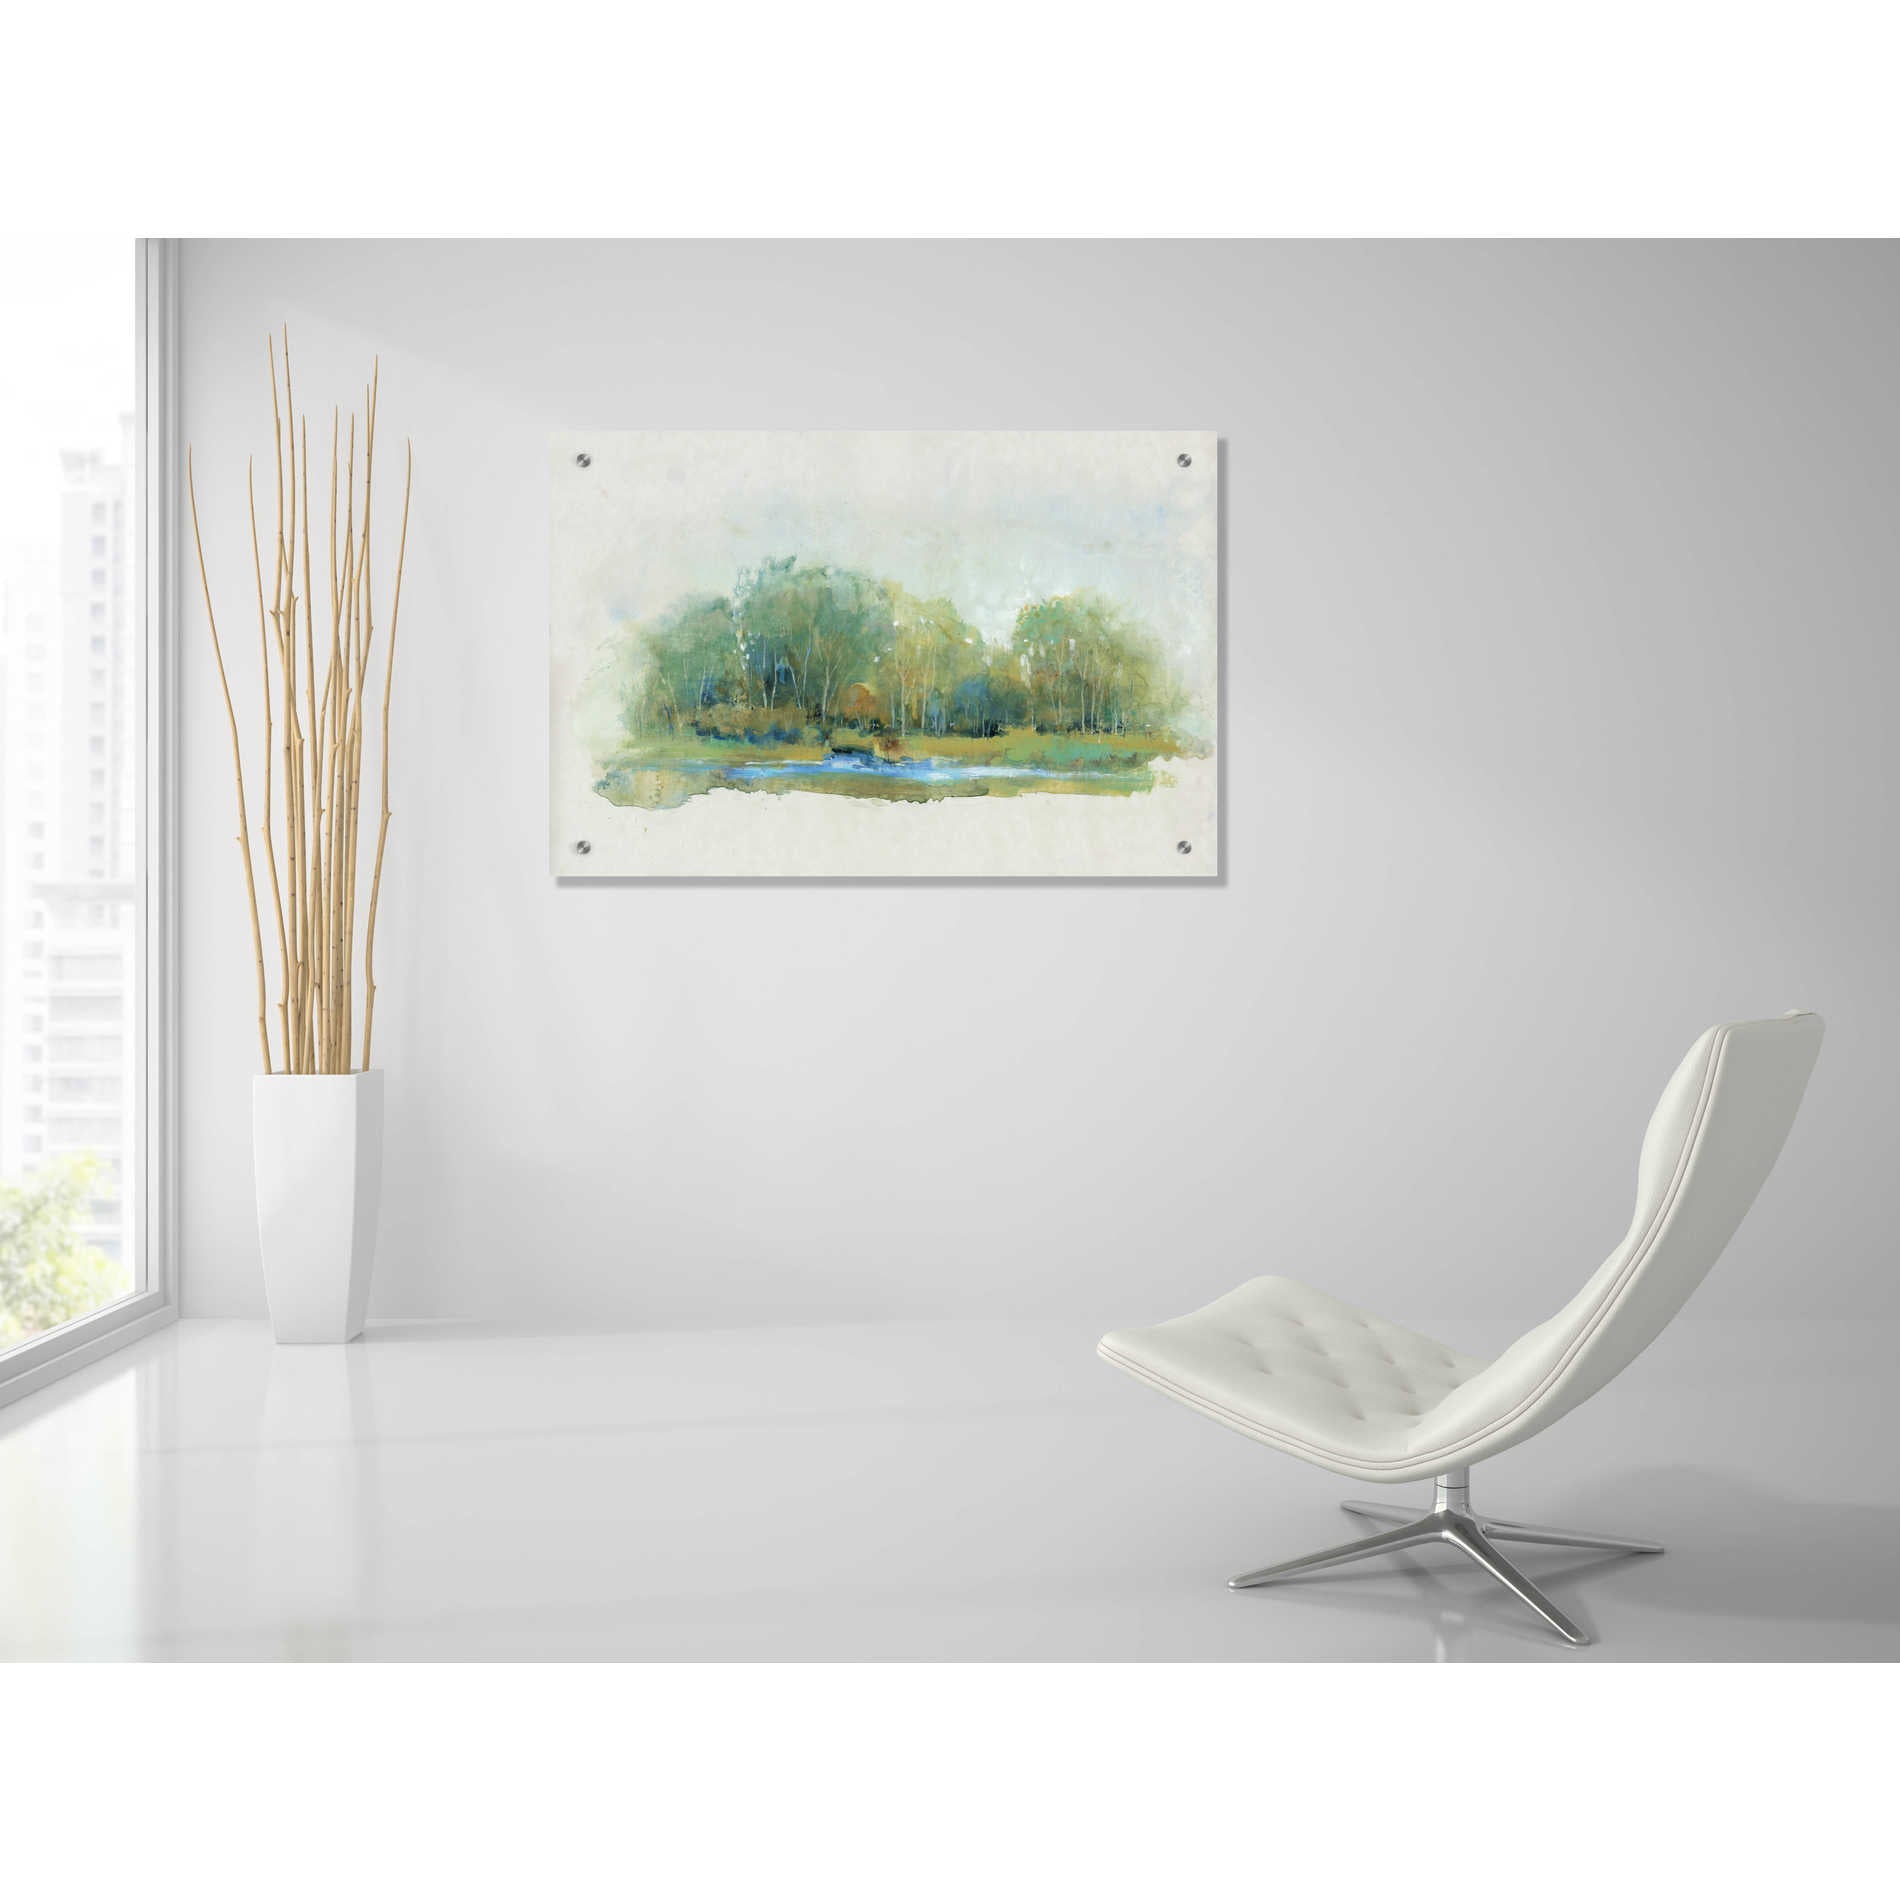 Epic Art 'Forest Vignette II' by Tim O'Toole, Acrylic Glass Wall Art,36x24